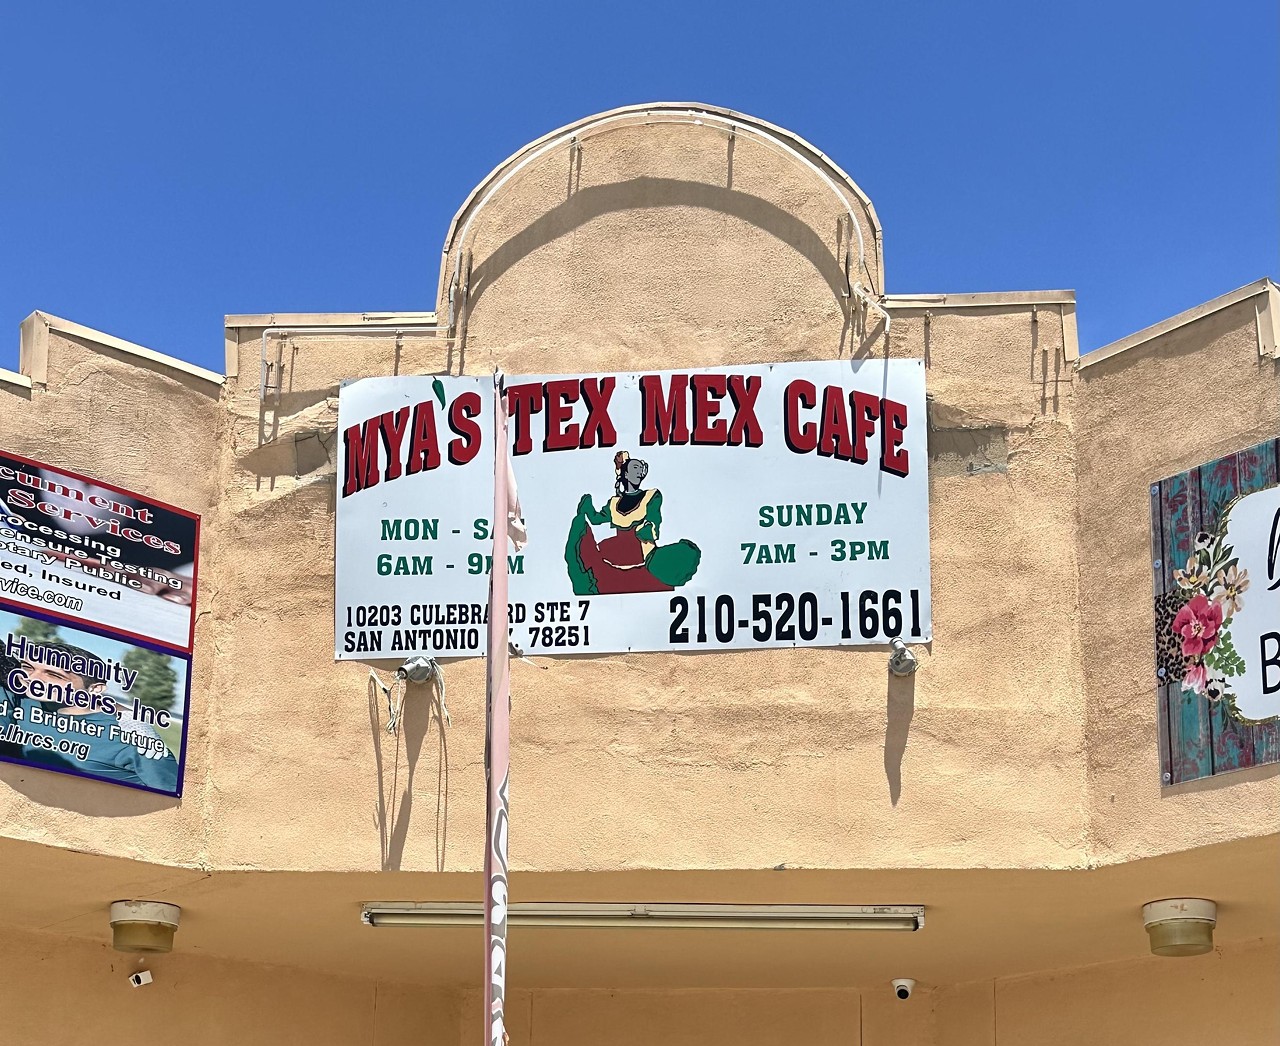 23. Mya's Tex Mex Cafe
10203 Culebra Road, (210) 520-1661, facebook.com/myastexmex
“Great service and great food! I got the barbacoa plate, had good flavor and the portion sizes were nice. My grandma got the flautas and she was really happy. The salsa is delicious! We ate two rounds of chips for that reason. It's a cute family owned spot” - Taira G.